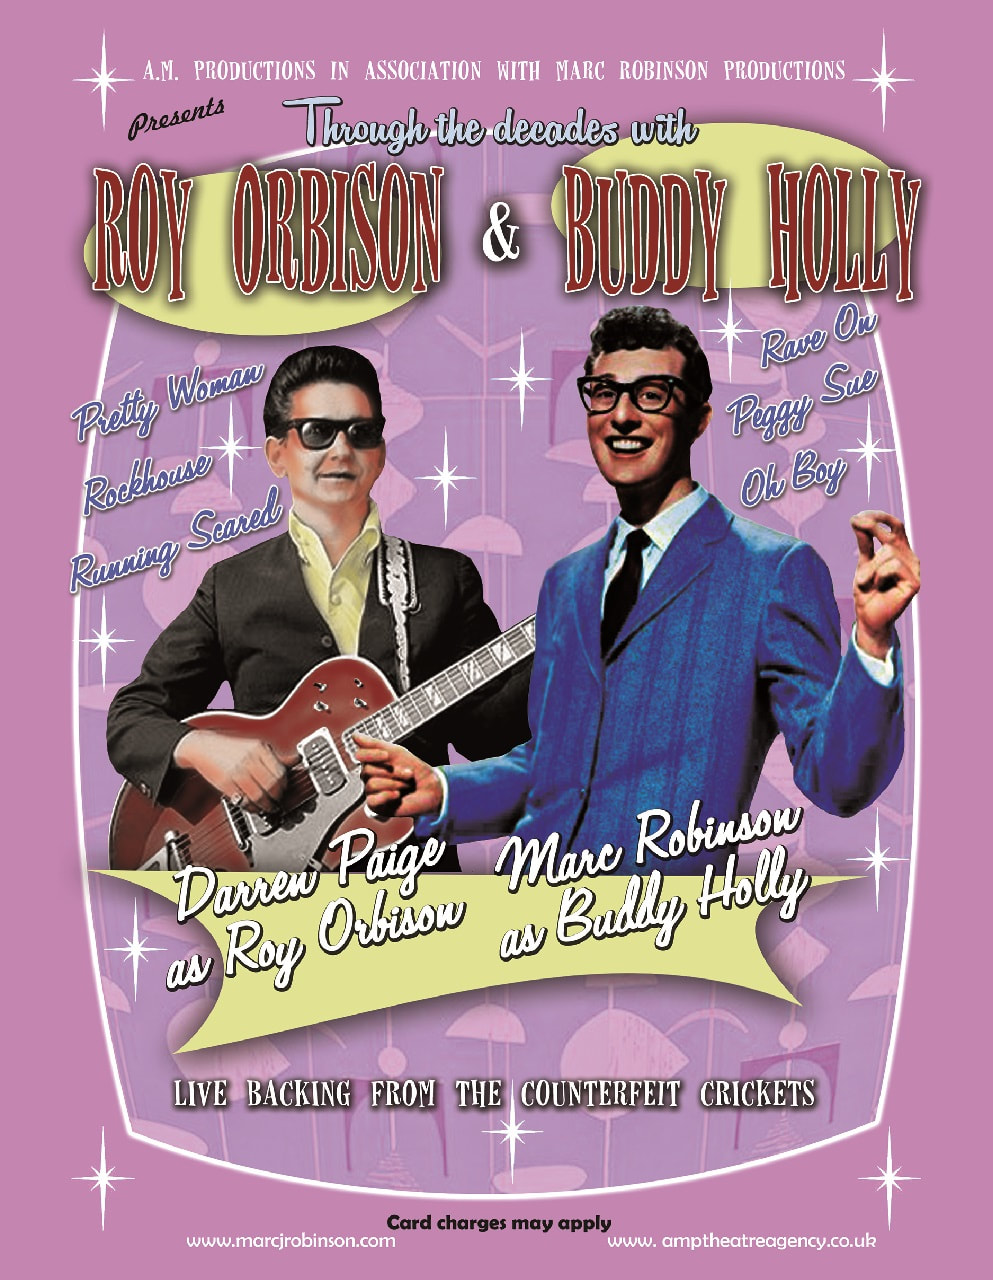 Poster for 'Through the decades with Roy Orbison & Buddy Holly'